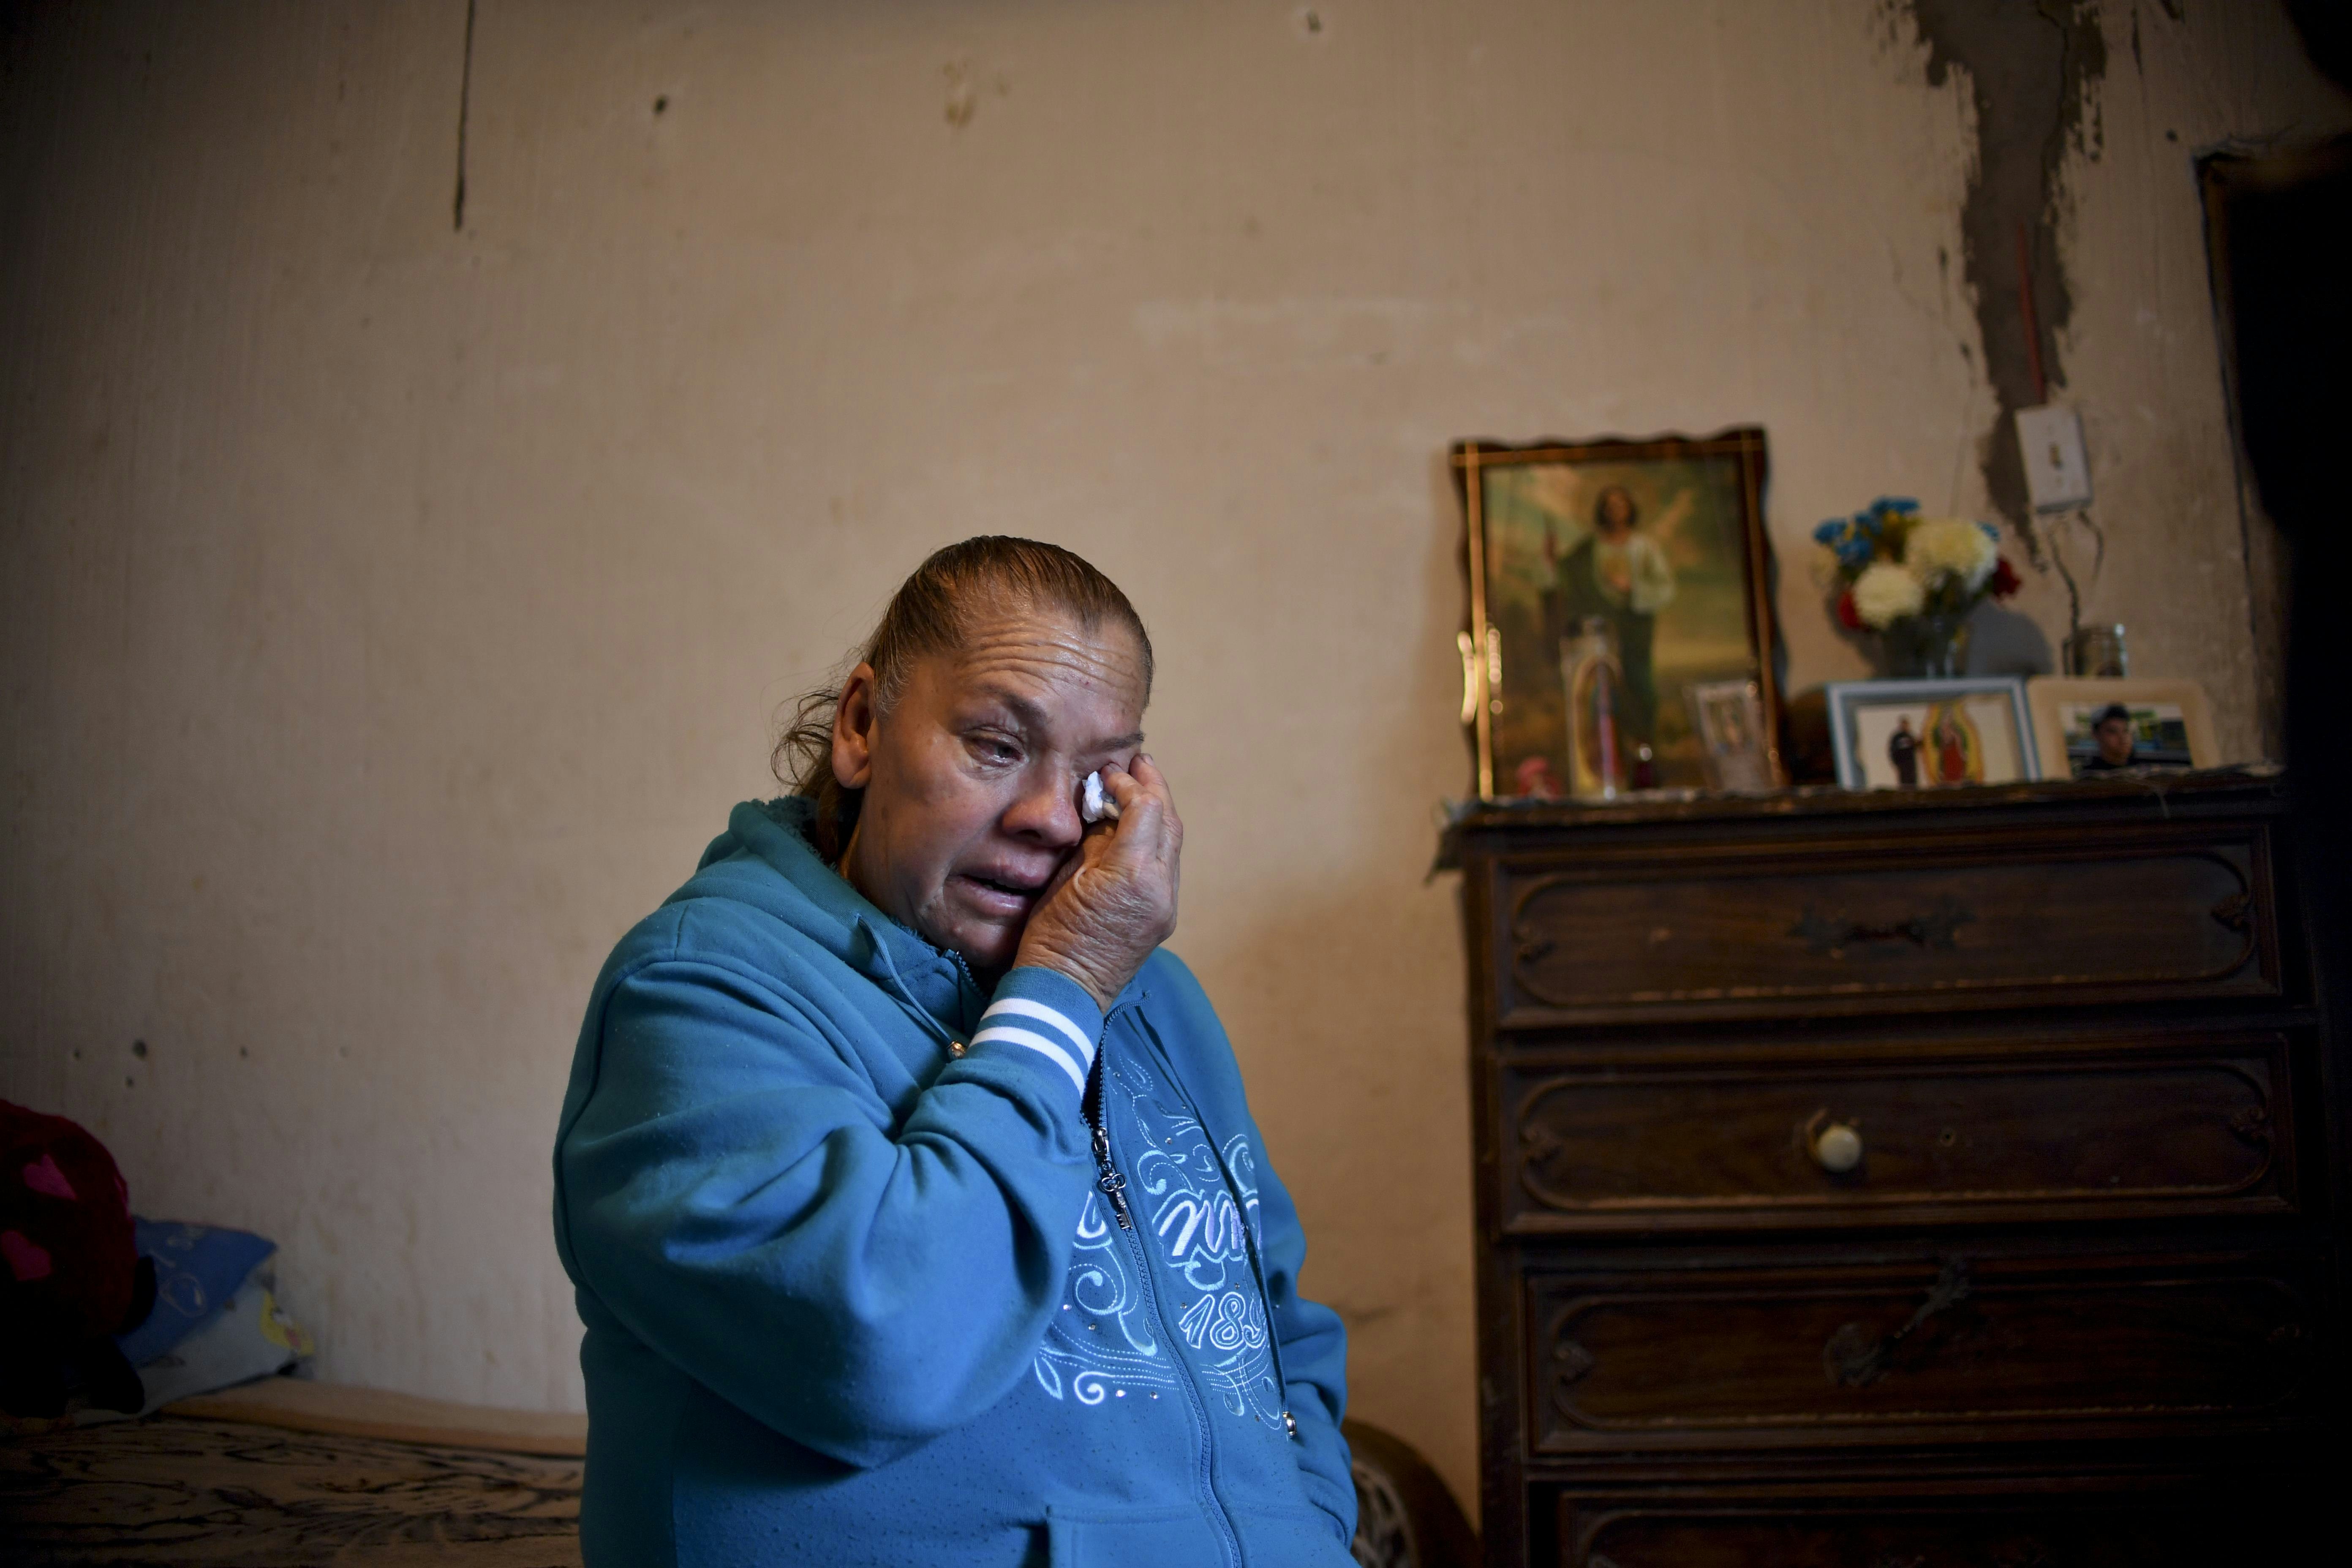 Maria Guadalupe Guereca, 60, cries while remembering her murdered son Sergio Hernandez, during an interview with AFP at her house in Ciudad Juarez, Chihuahua, Mexico, on February 18, 2017. The shooting occurred June 7, 2010 while Sergio Hernandez was spending time with three friends on the banks of the Rio Grande, which separates Ciudad Juarez in Mexico from El Paso in Texas, US. Sergio was shot dead at 15 by police officer Jesus Mesa. This would have been another tale of tragic and banal violence, had the victim not been in Mexico and the perpetrator in the United States. / AFP / Yuri CORTEZ        (Photo credit should read YURI CORTEZ/AFP via Getty Images)